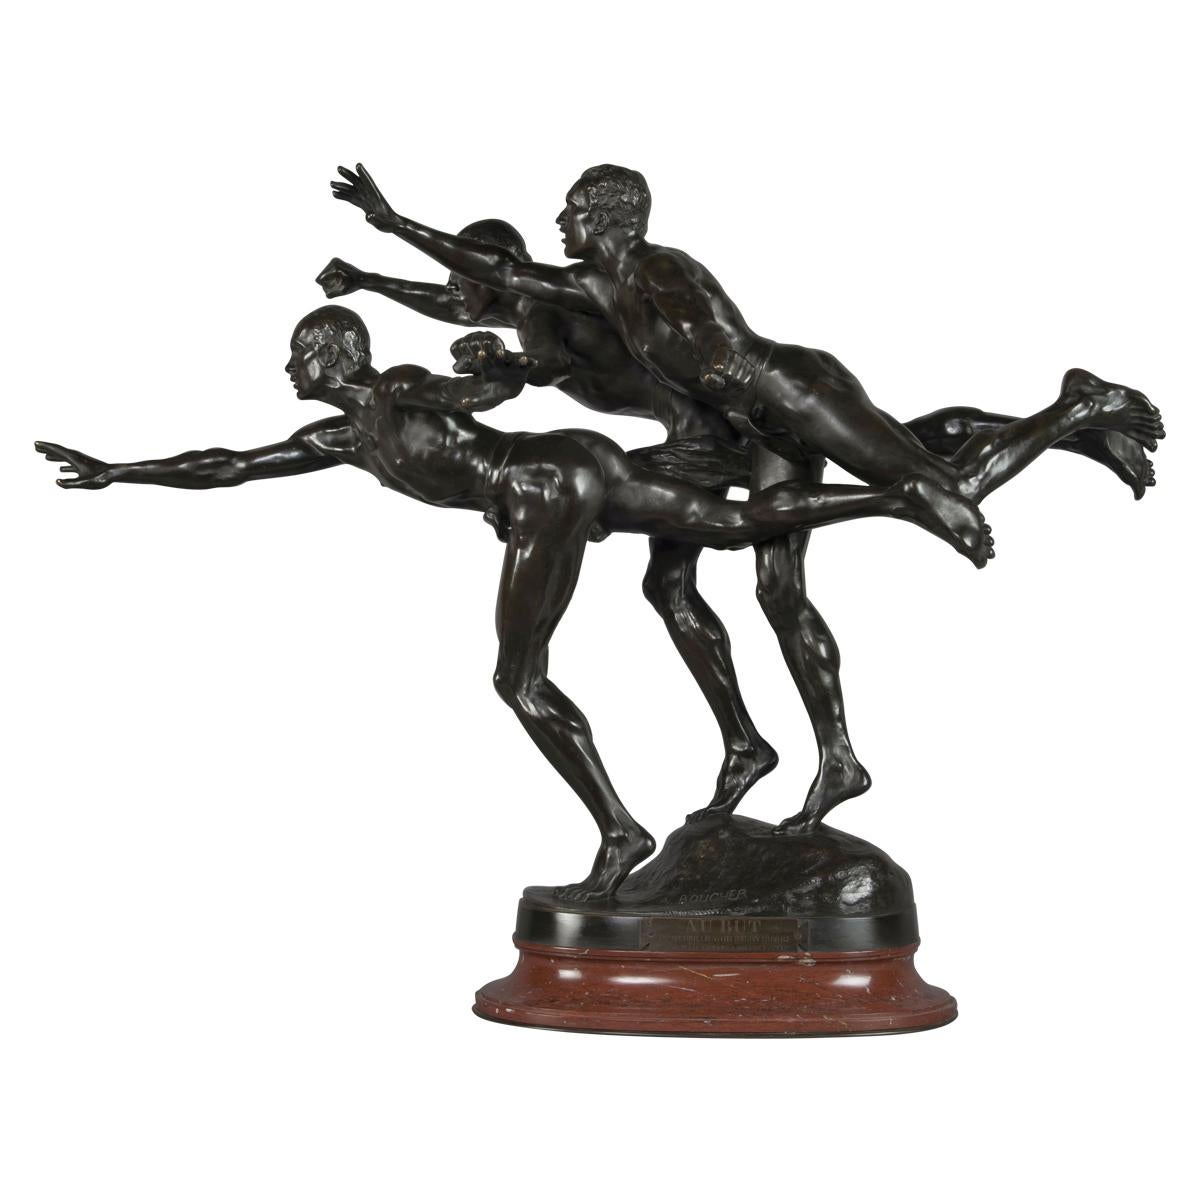 'Au But' a Patinated Bronze Figural Group by Alfred Boucher. French, 1890